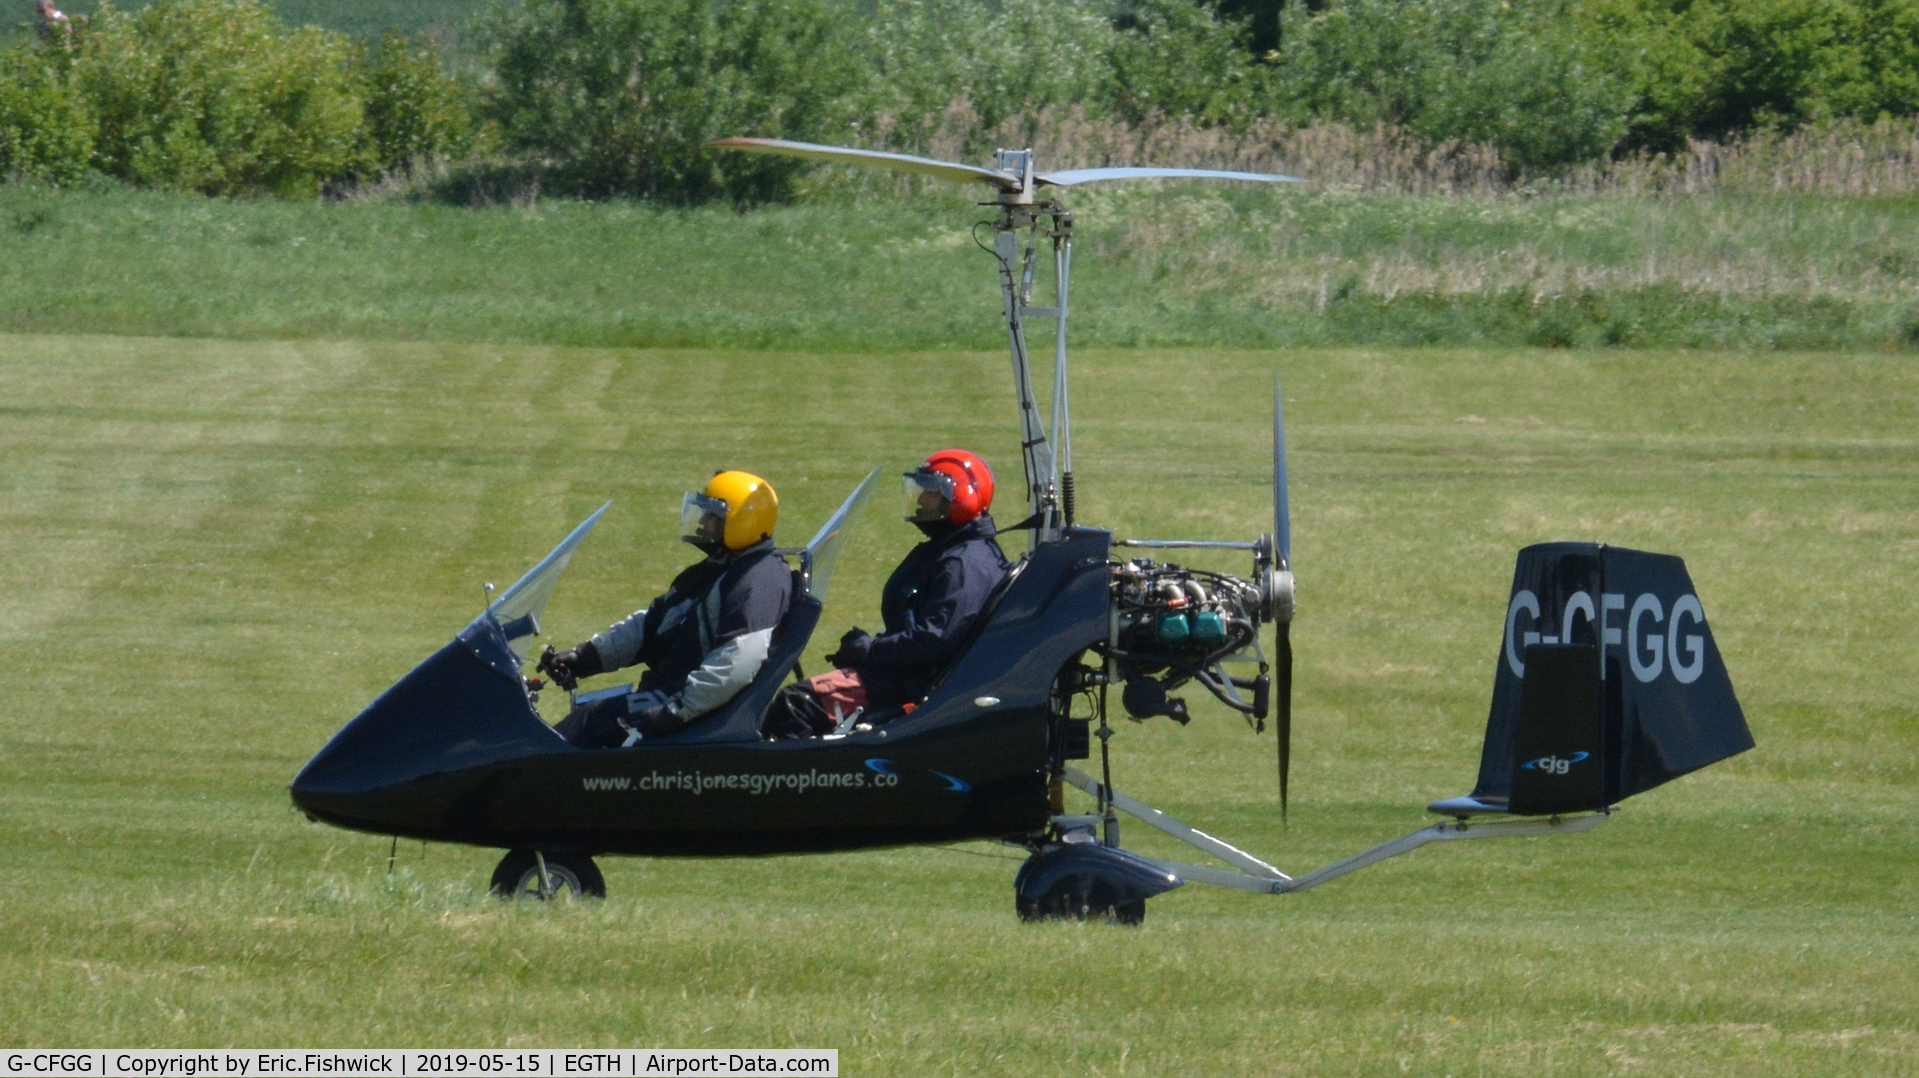 G-CFGG, 2008 Rotorsport UK MT-03 C/N RSUK/MT-03/049, 1. G-CFGG arriving for the British Rotor Association annual gathering at the Shuttleworth Collection, May. 2019.